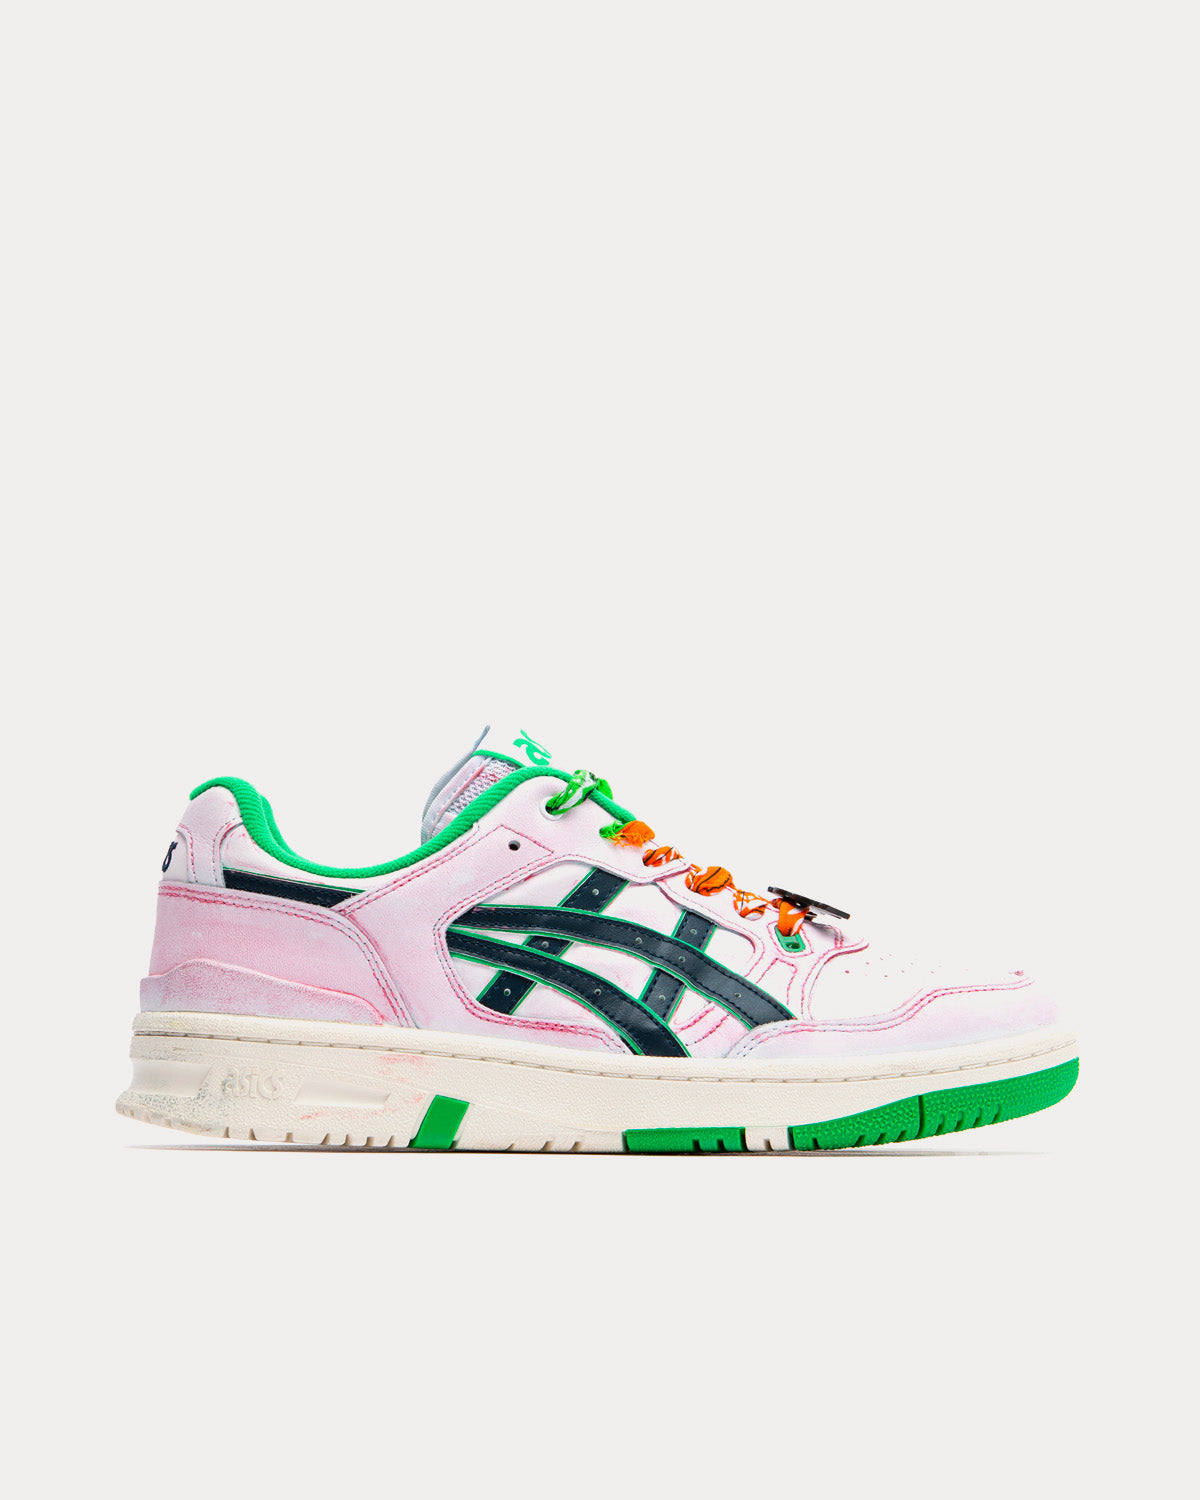 Asics x (di)vision - EX89 Washed Pink / Orange / Green Low Top Sneakers